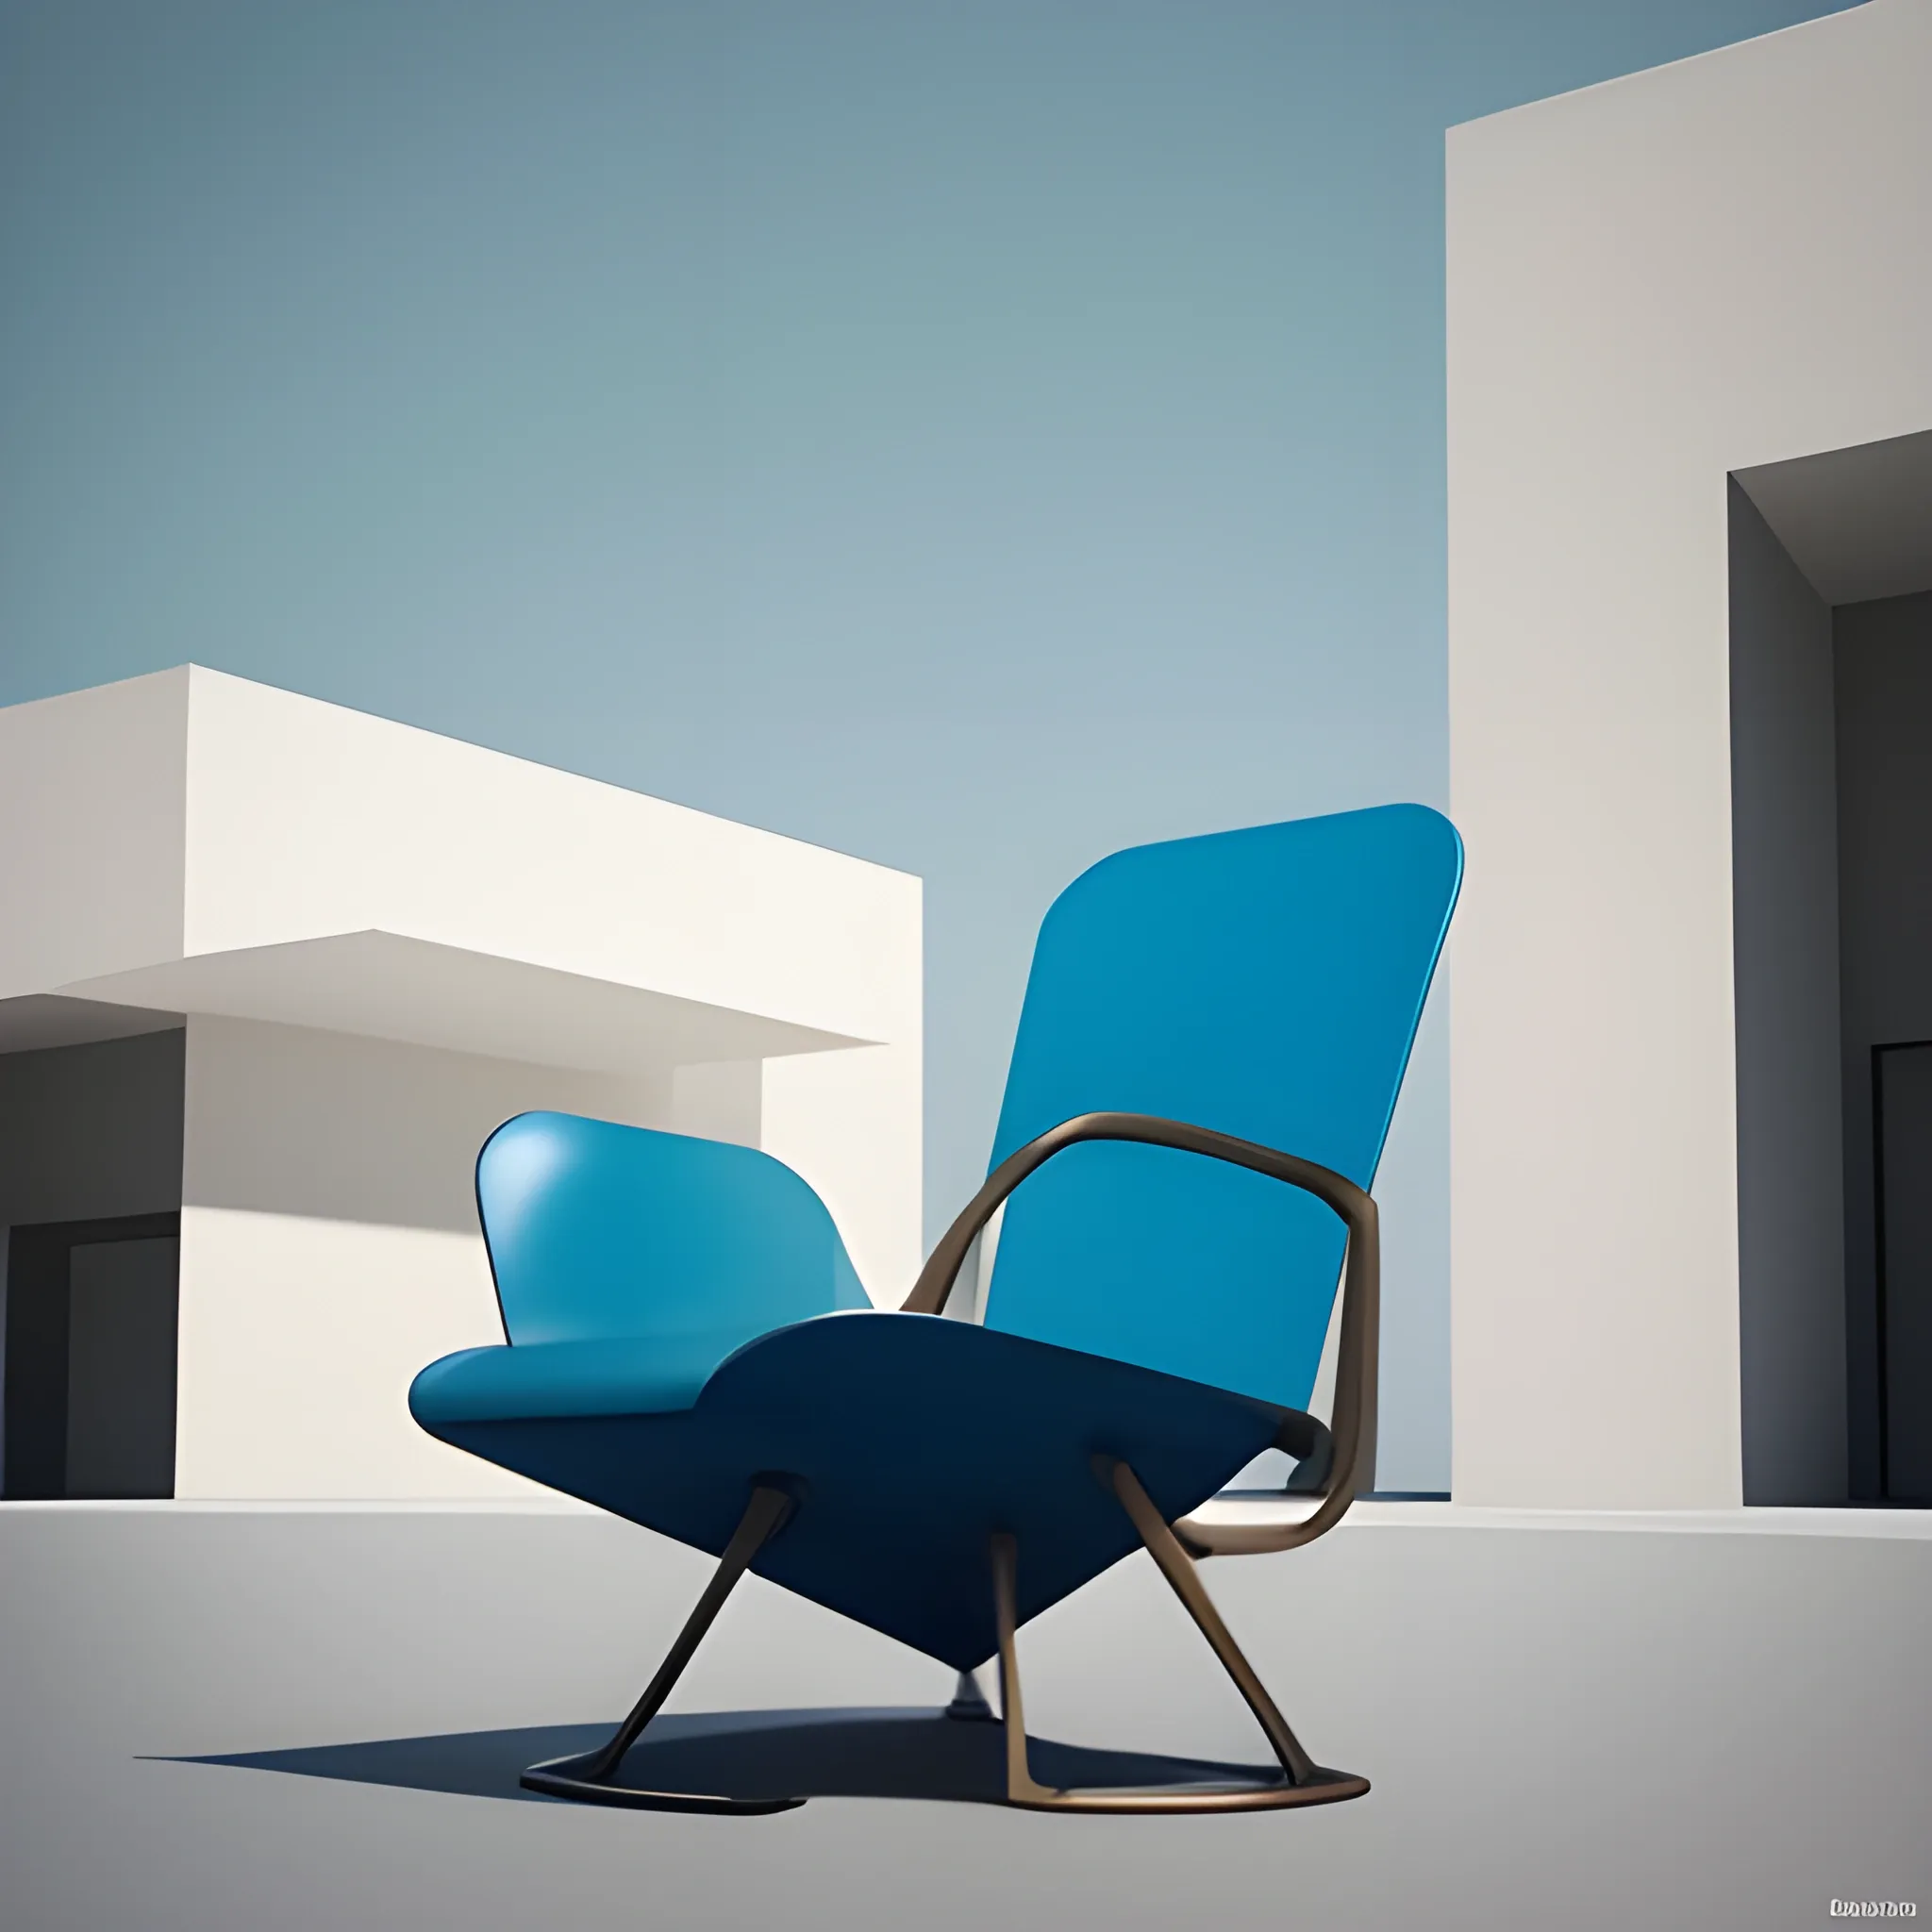 Create a monumental modern sculptured  one italian CHAIR in Claes Oldenburg style, simple design as Bahaus style, minimal, geometric simplicity, Bronce material surface only , asymetric composition , blue sky background, pretty detailed HD render, classic base, fountain, 3D, 